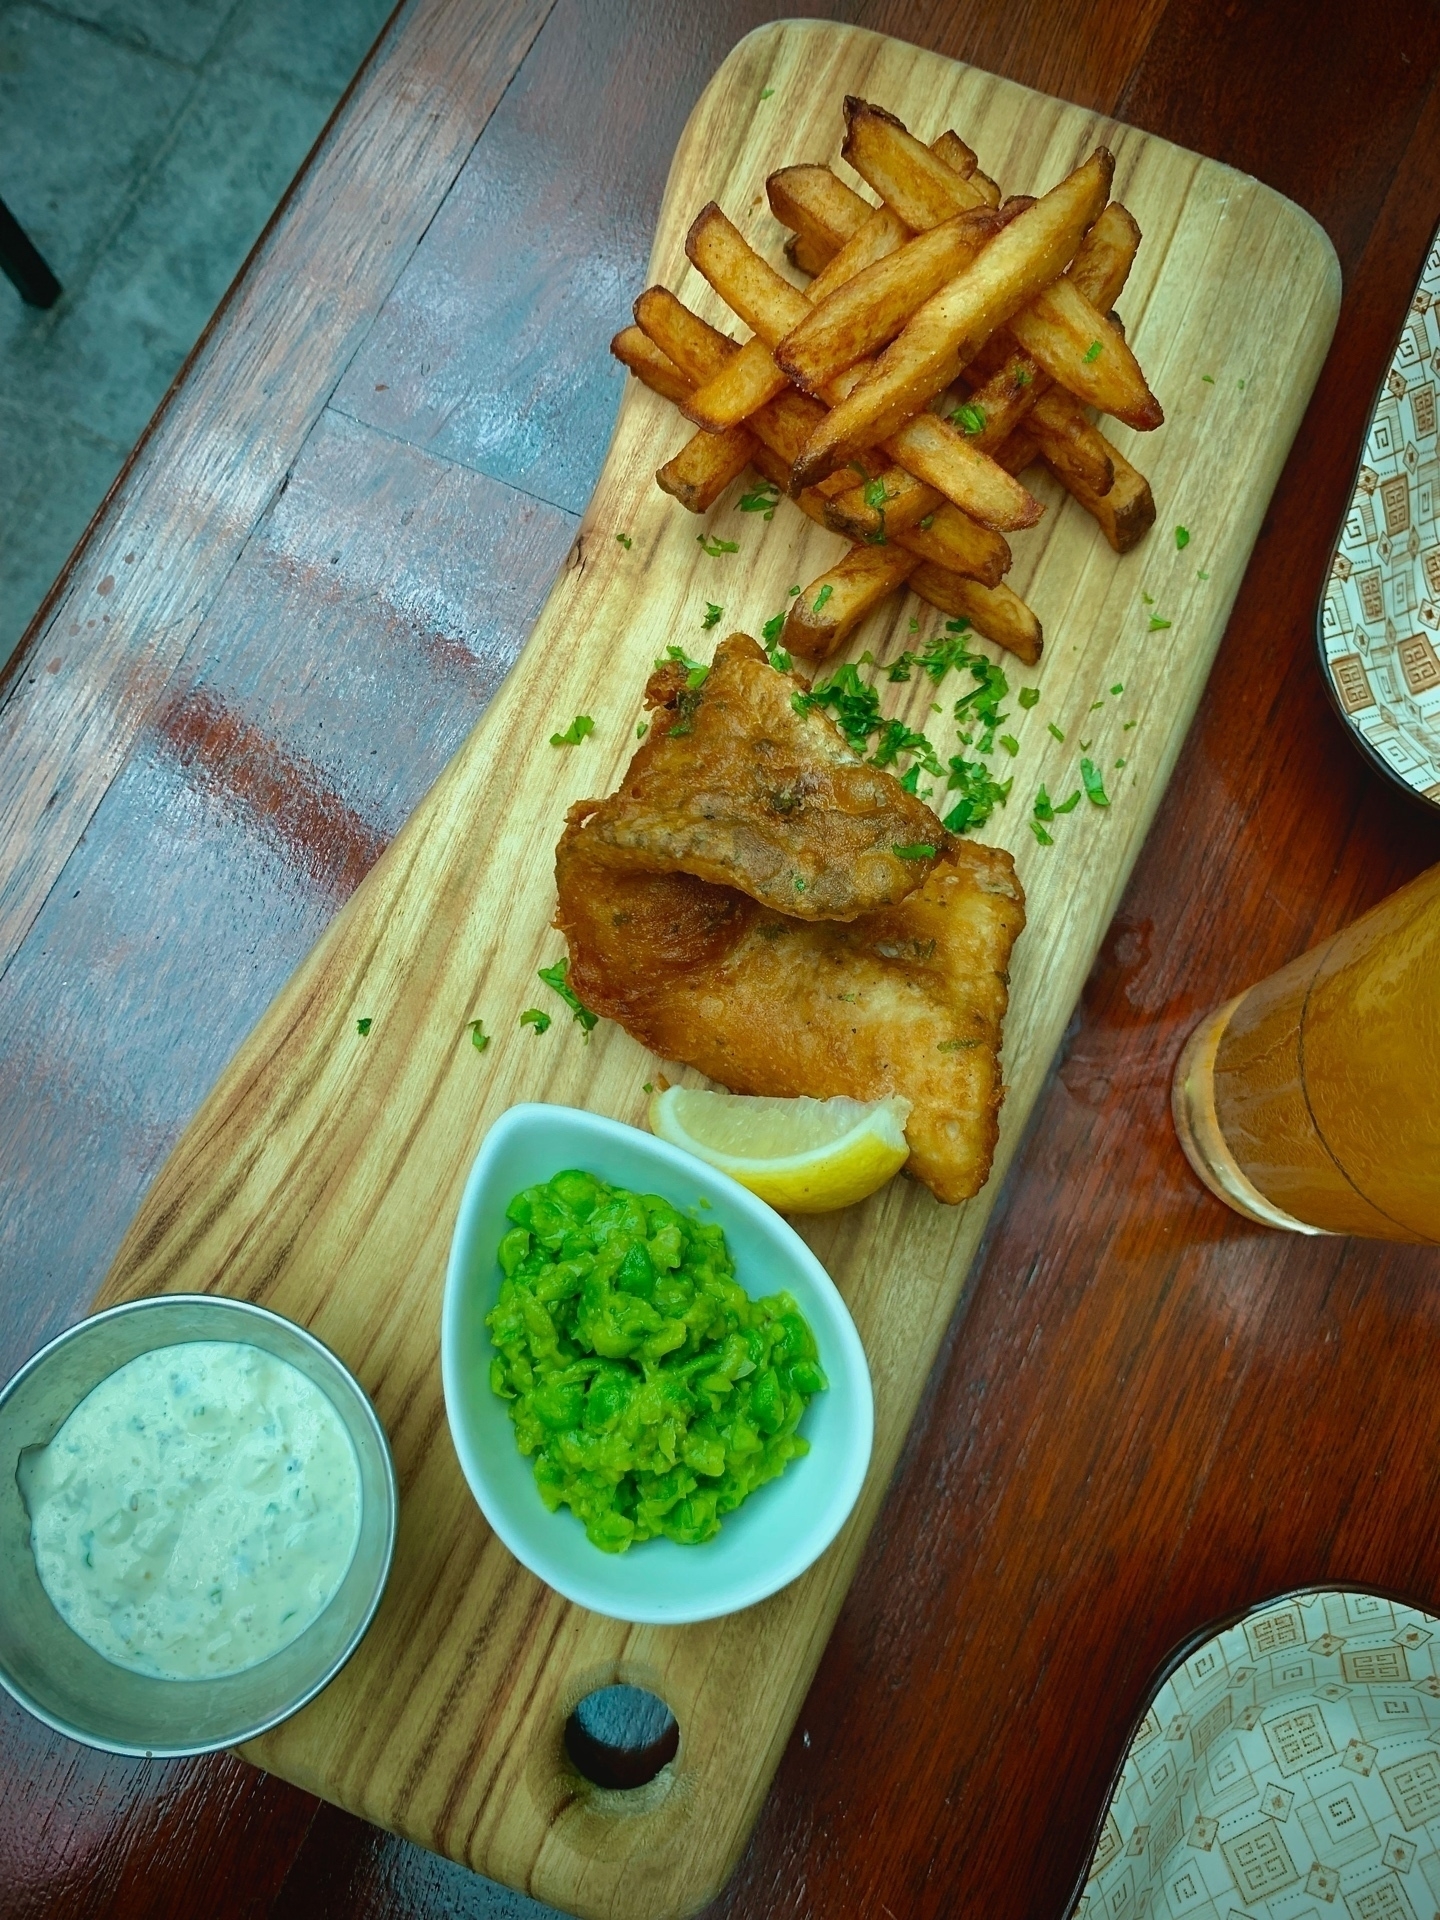 Fish and Chips served on a wooden board, along with mushed peas, a wedge of lemon and tartar sauce